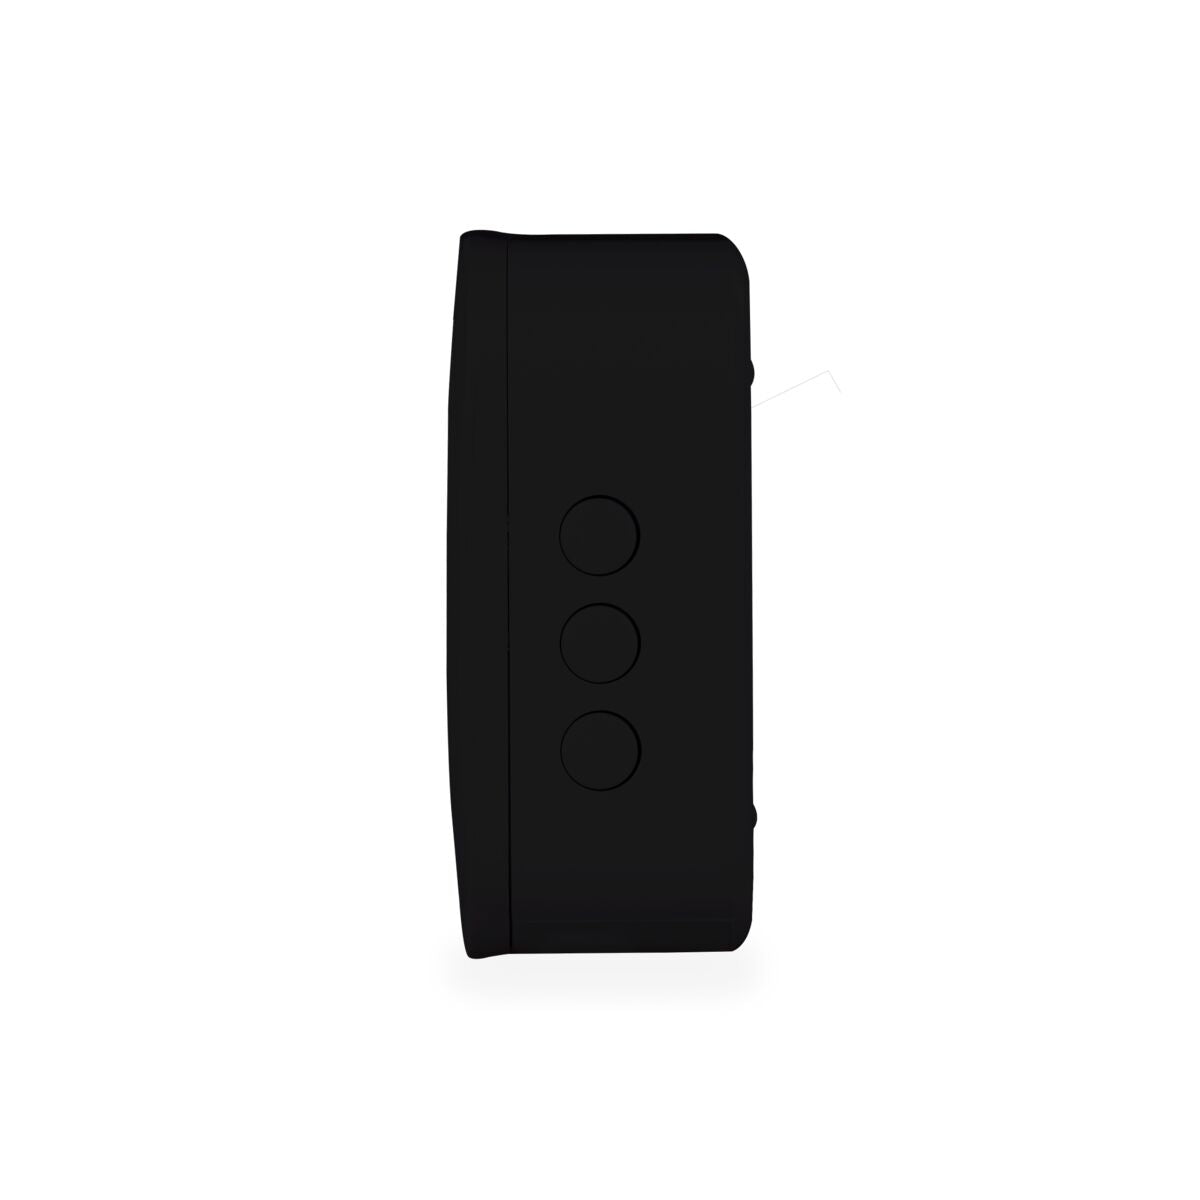 Bell ME BLK - Wireless bell - Chime for Buzz LO - Side View Image | Marmitek